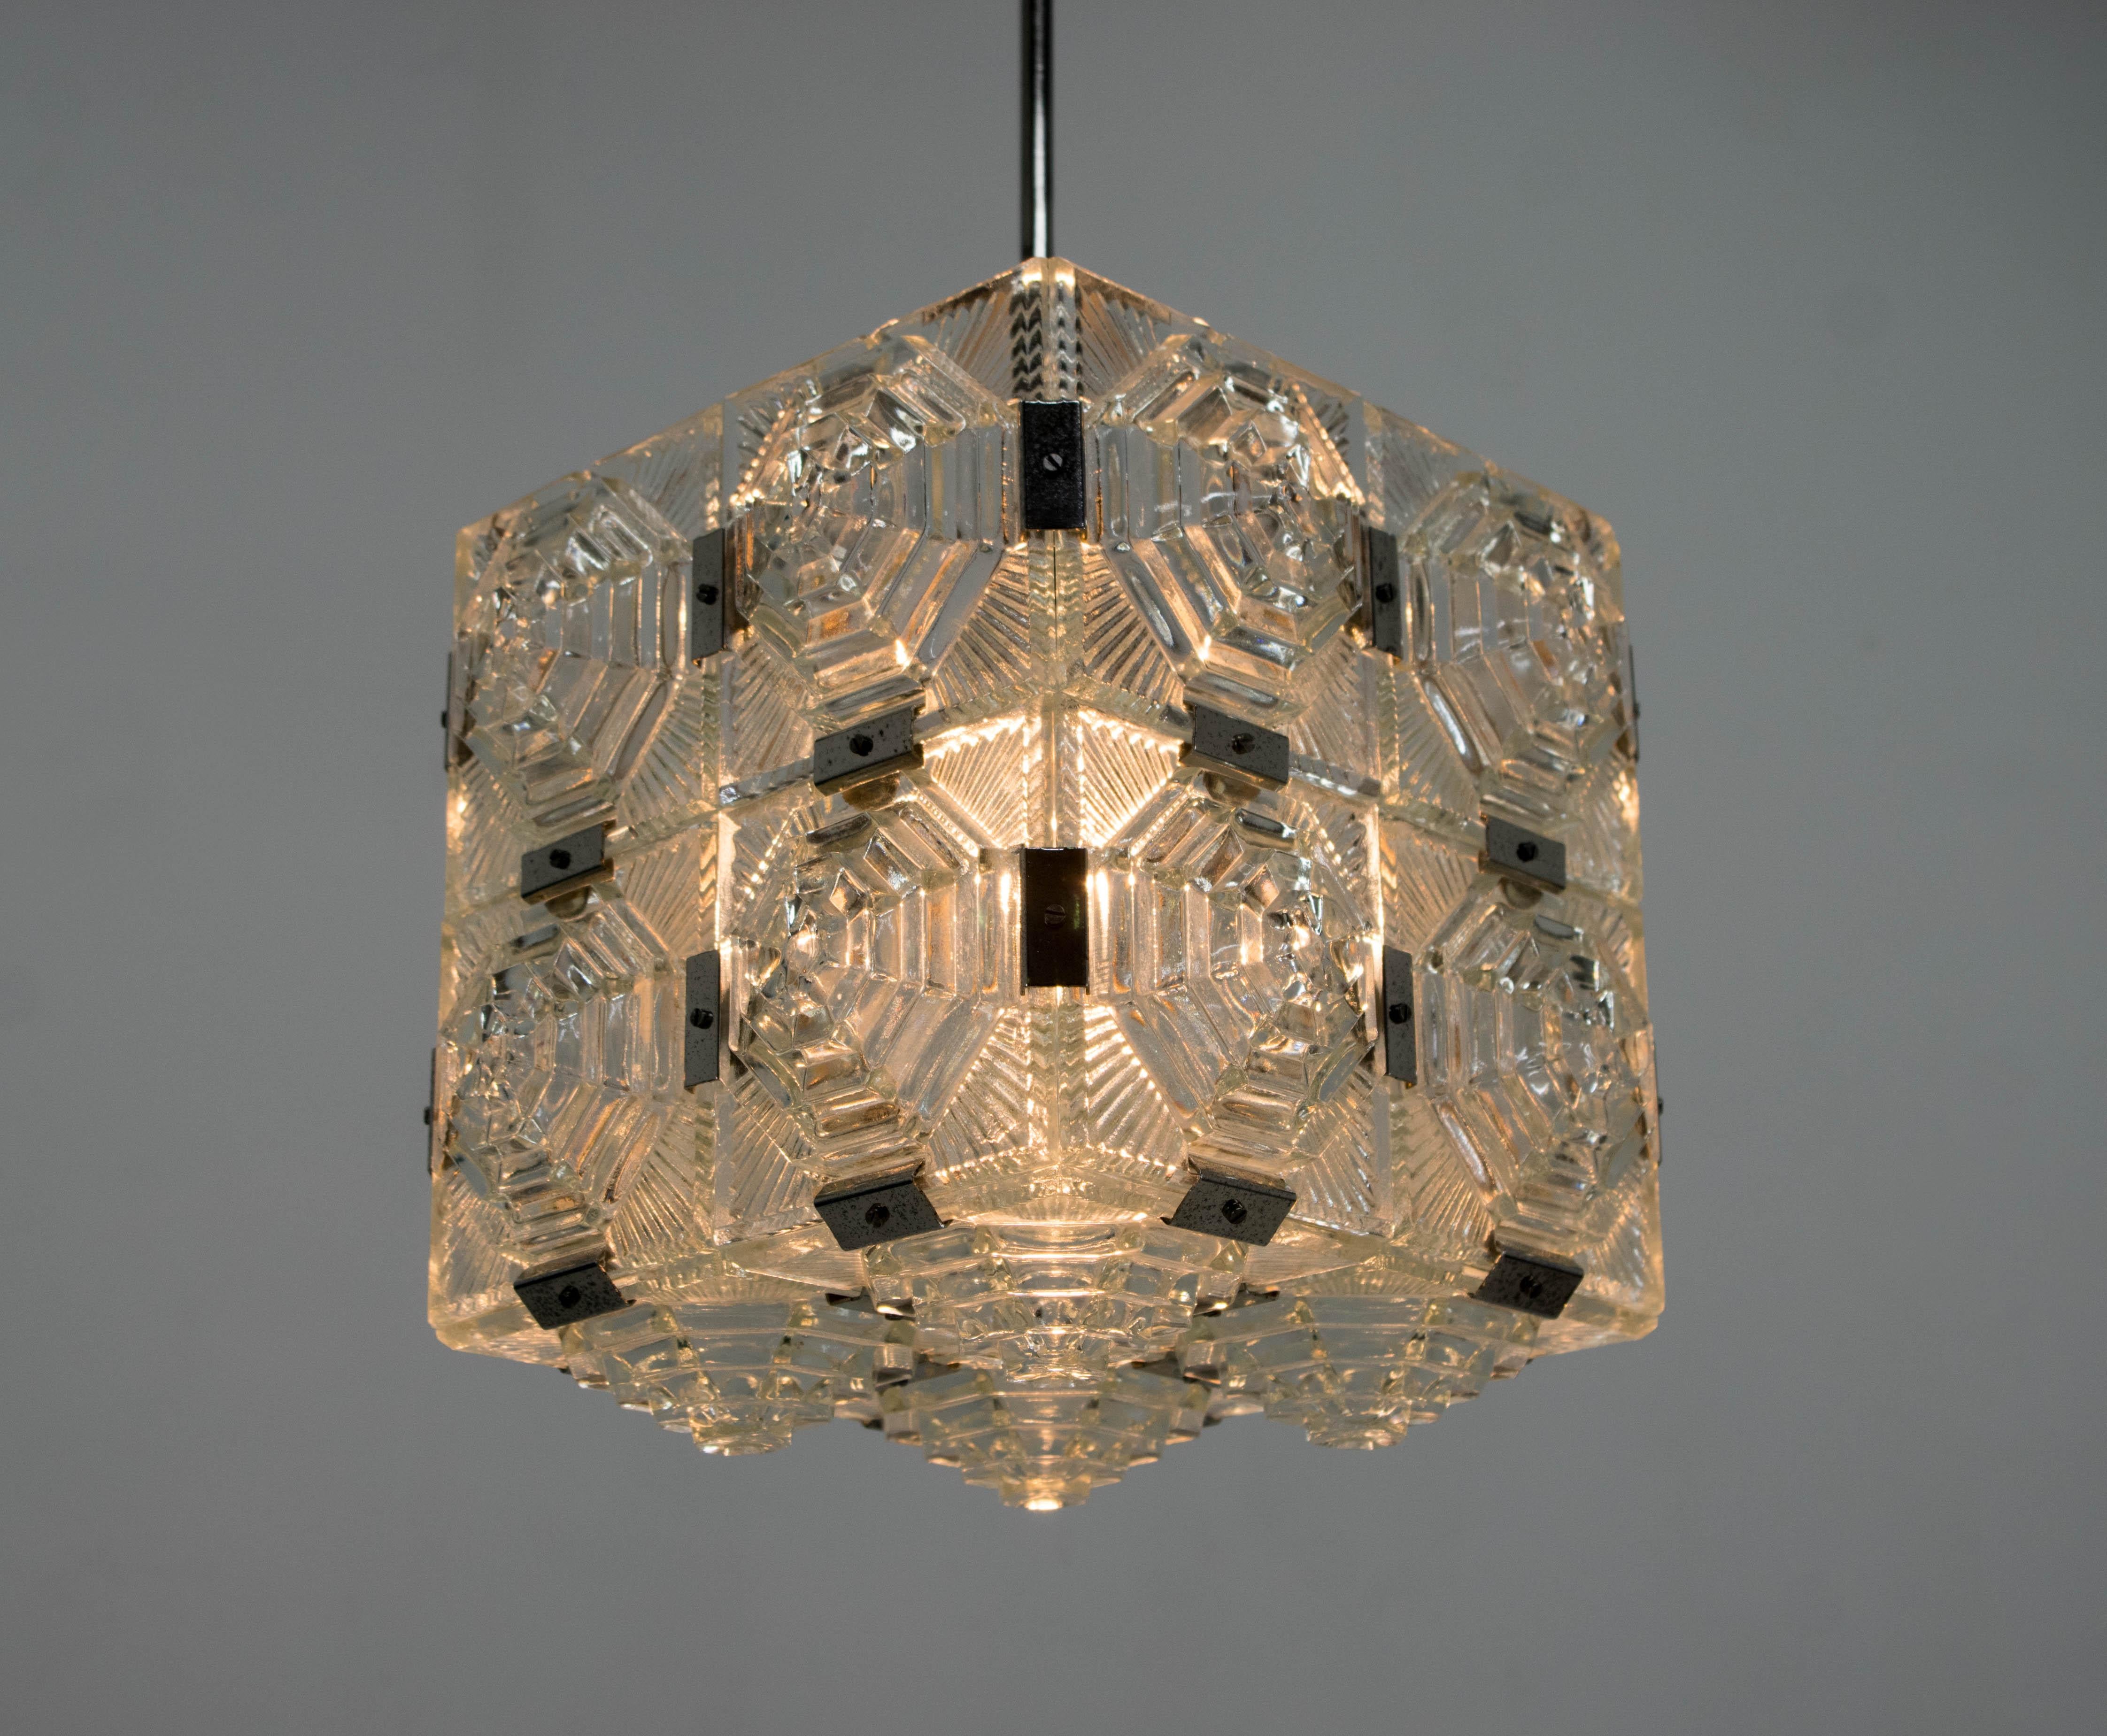 Beautiful glass pendant with Aztec pattern.
Designed by Jaroslav Bejvl and executed by Kamenicky Senov
Cleaned, rewired
Rod can be shortened on request
1x100W, E25-E27 bulb
US wiring compatible.